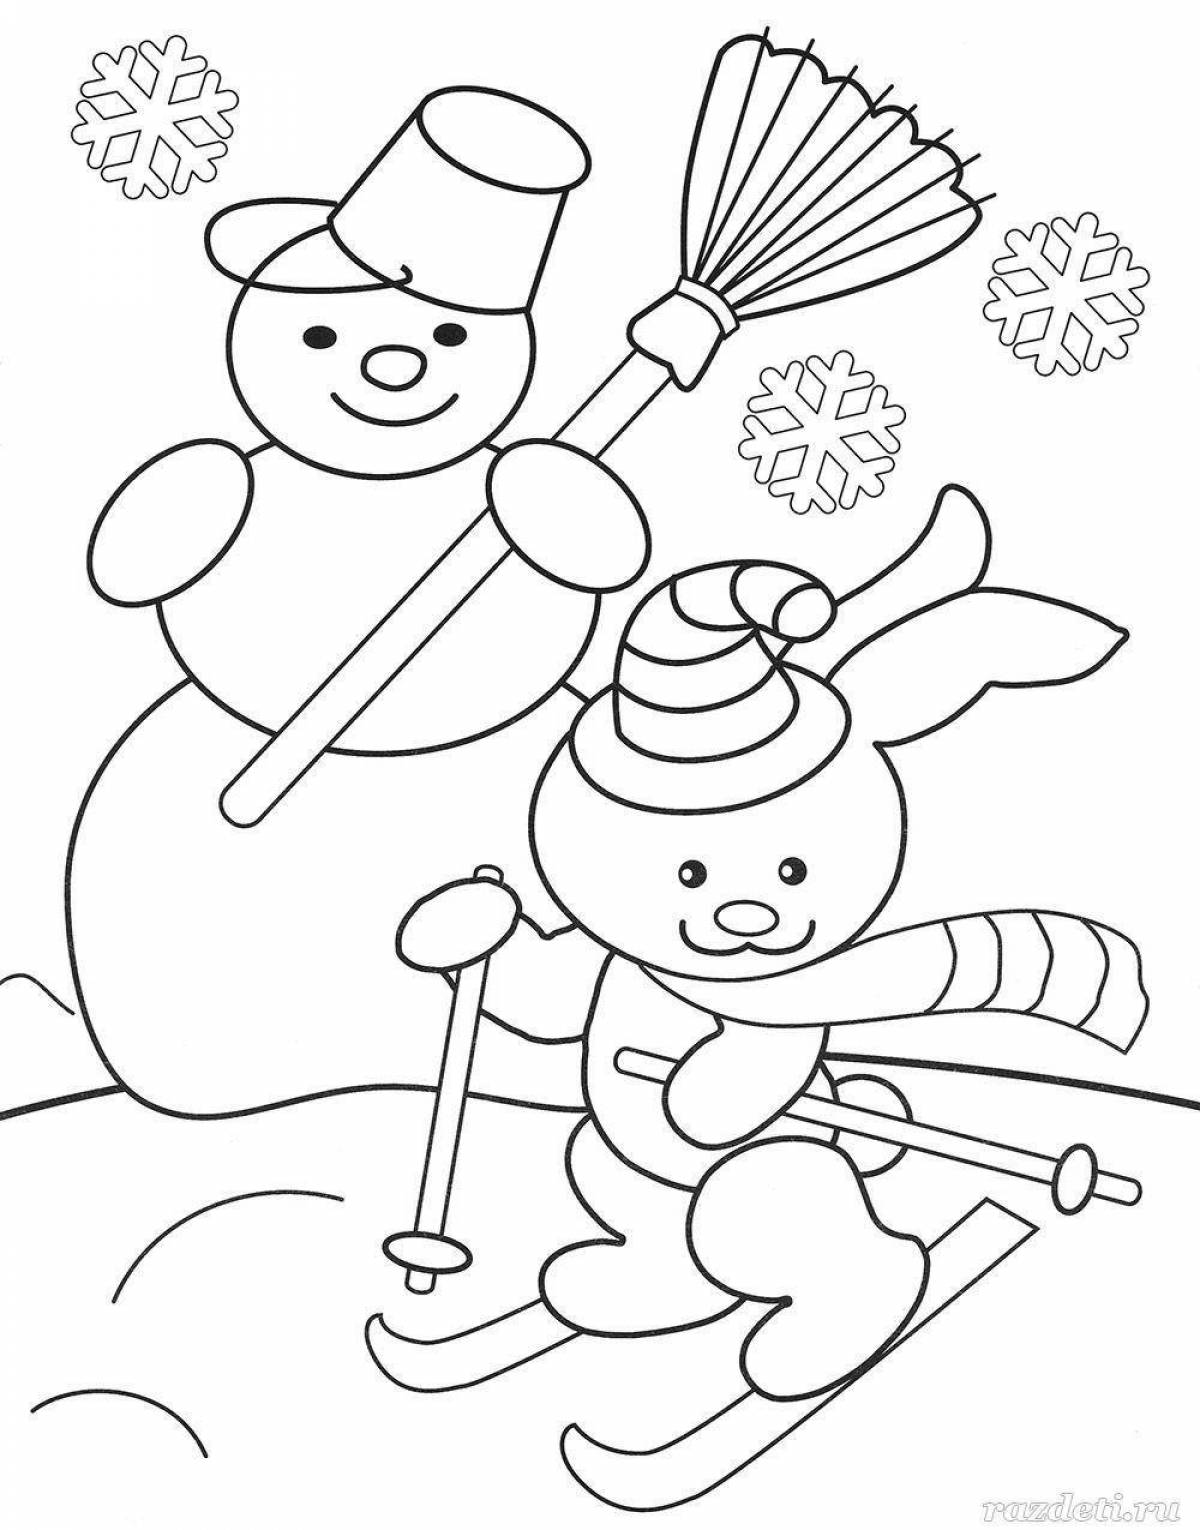 Rainbow coloring winter for children 5 years old